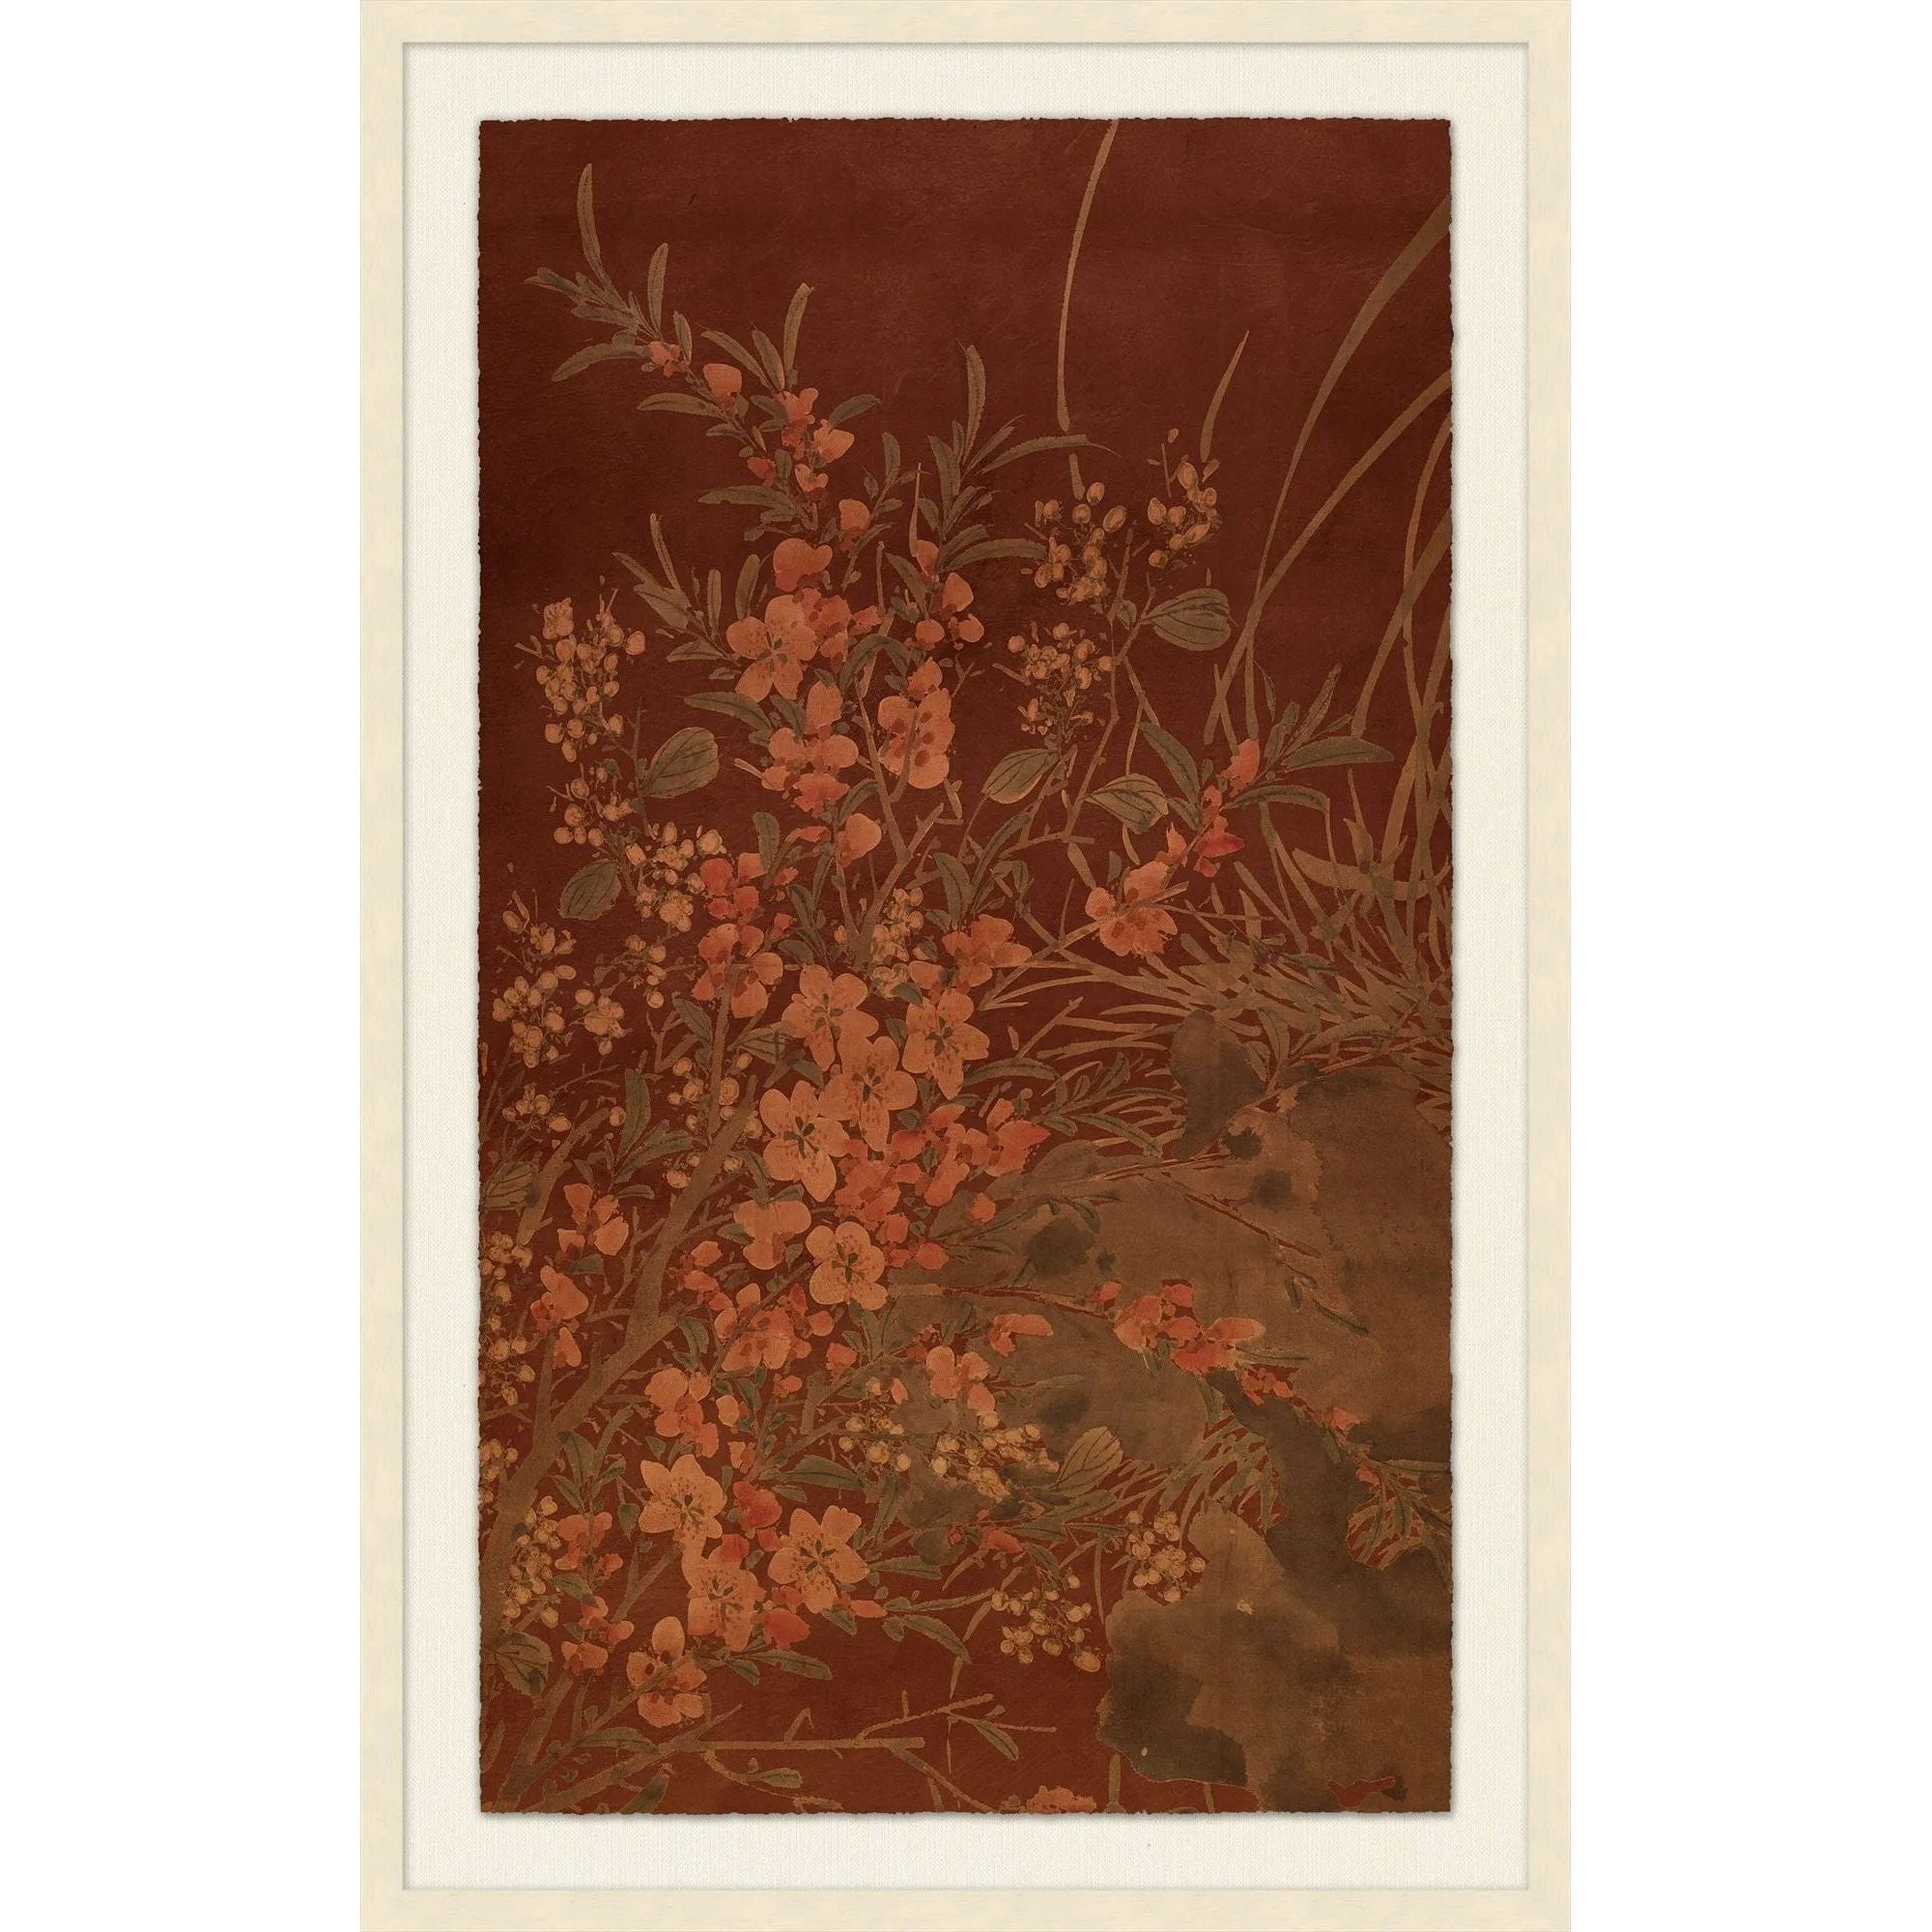 Specialty:  Giclee on Copper Leafed Paper, Single Mat, Hand Applied Copper Leafin Amethyst Home provides interior design, new home construction design consulting, vintage area rugs, and lighting in the Charlotte metro area.